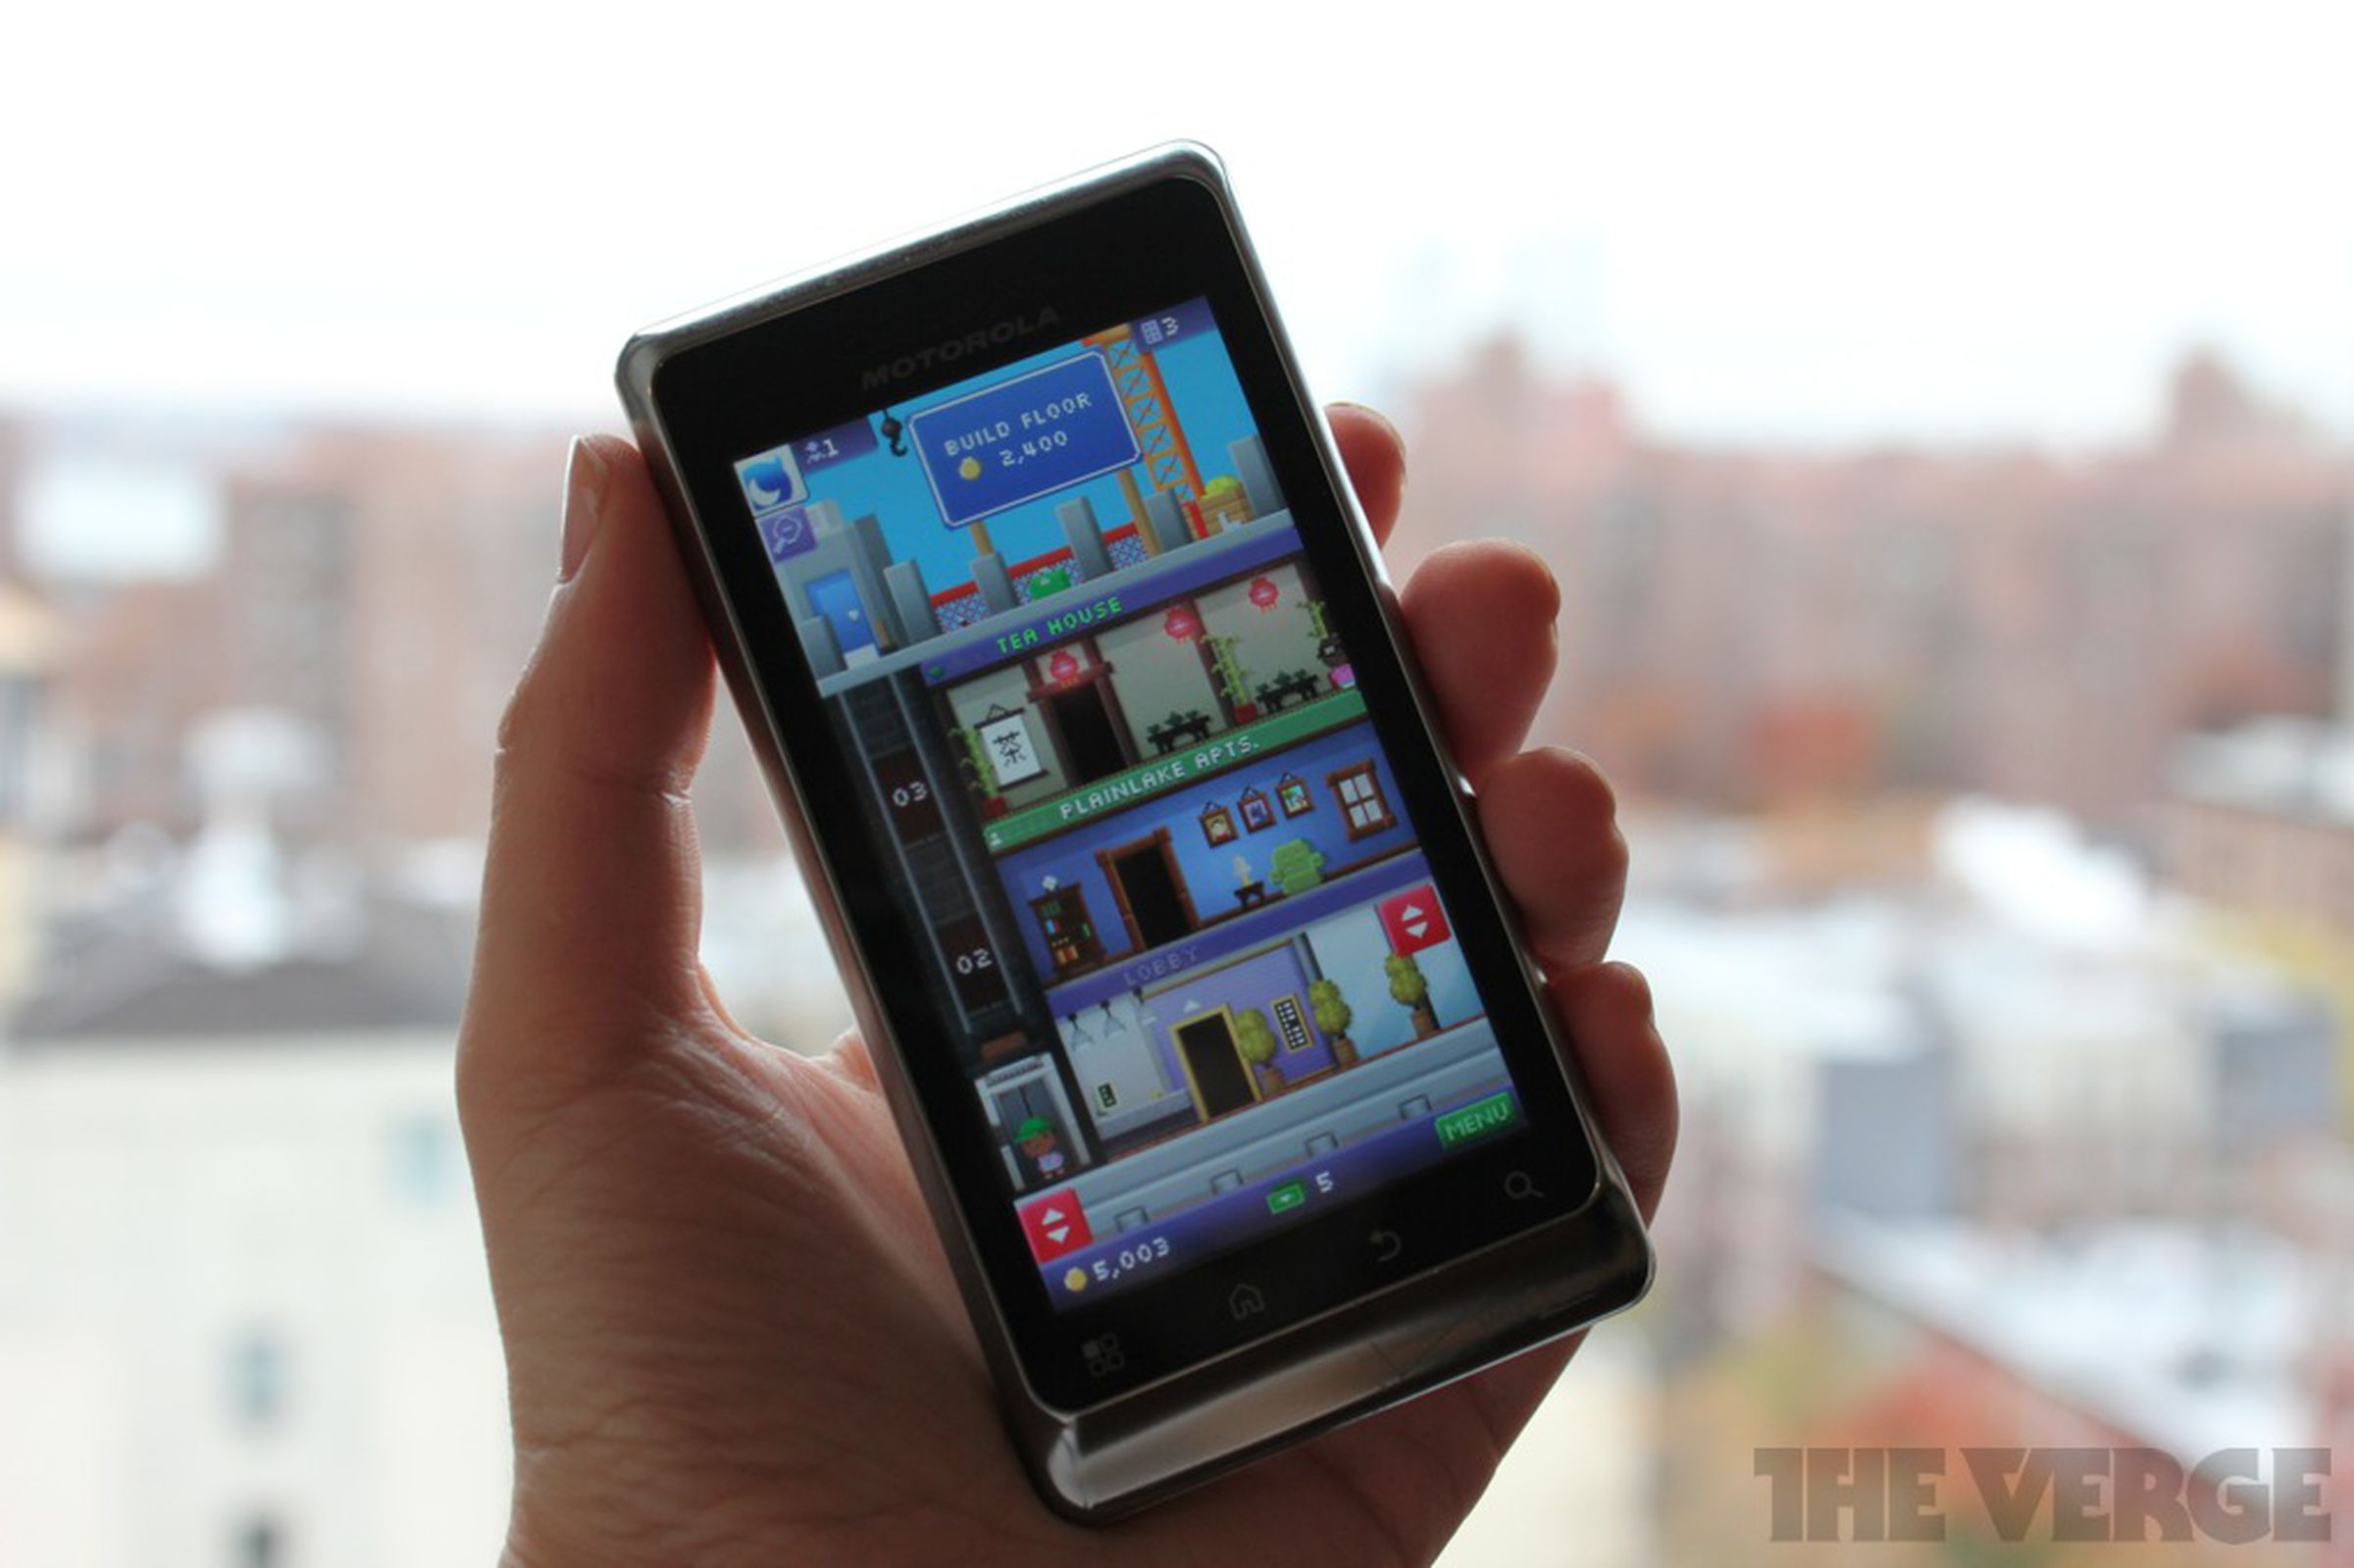 Tiny Tower for Android 